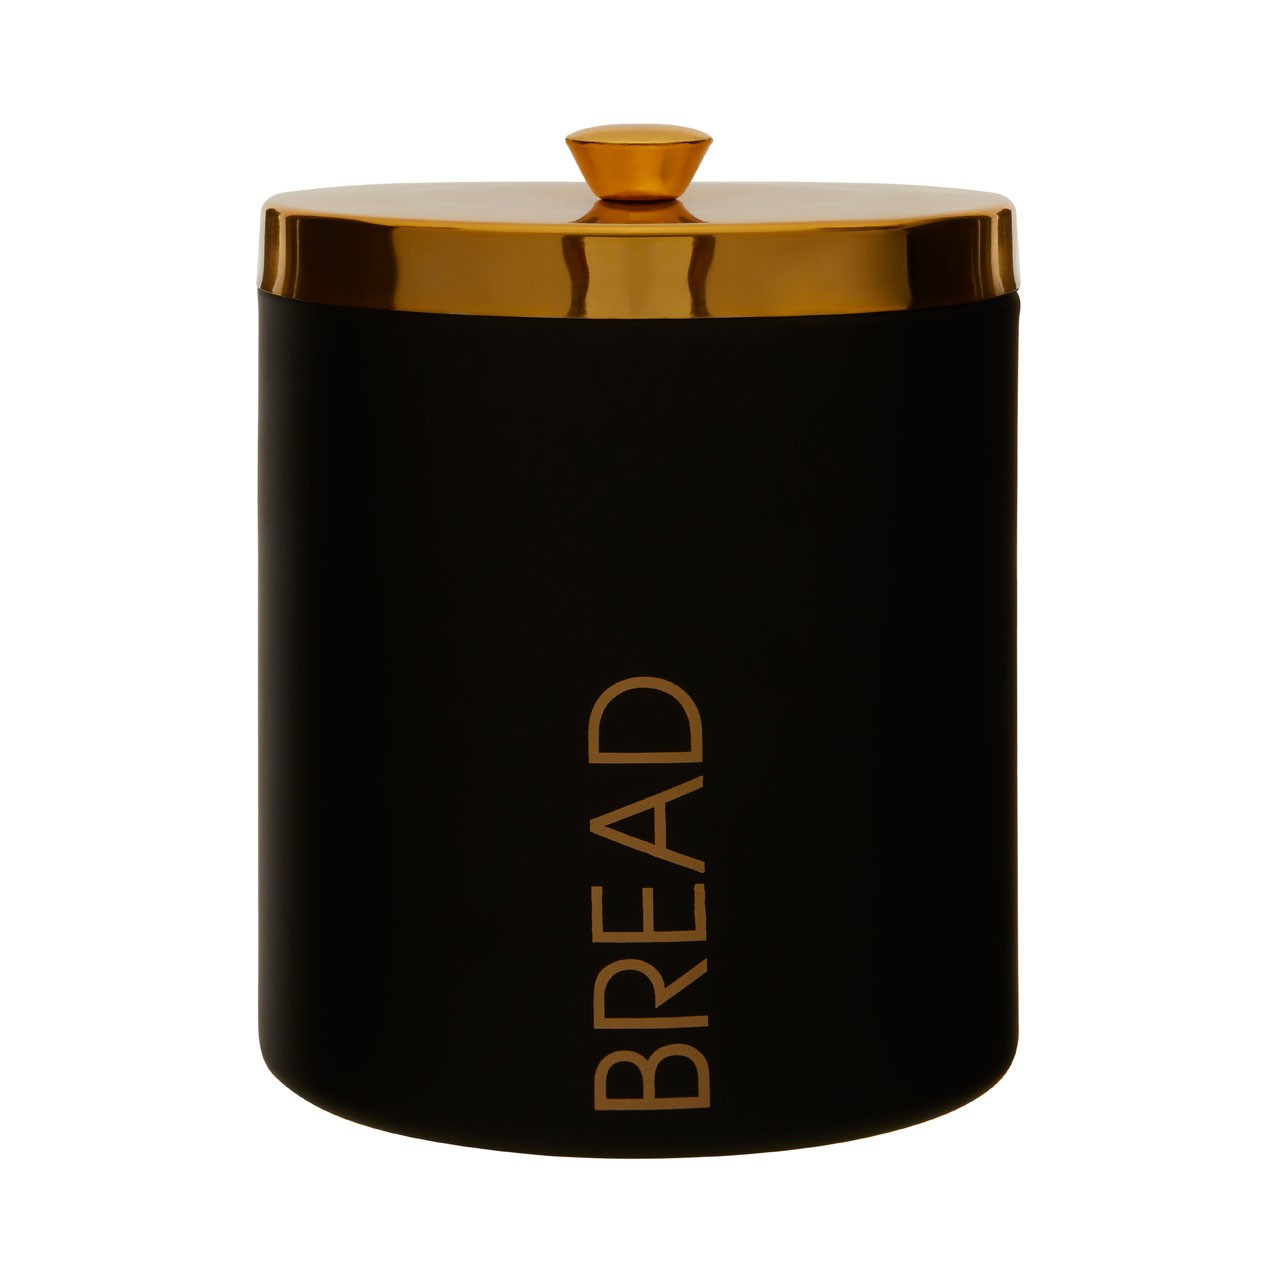 Liberty Black Enamel Finish Bread Bin with Gold Lid for Food Sto